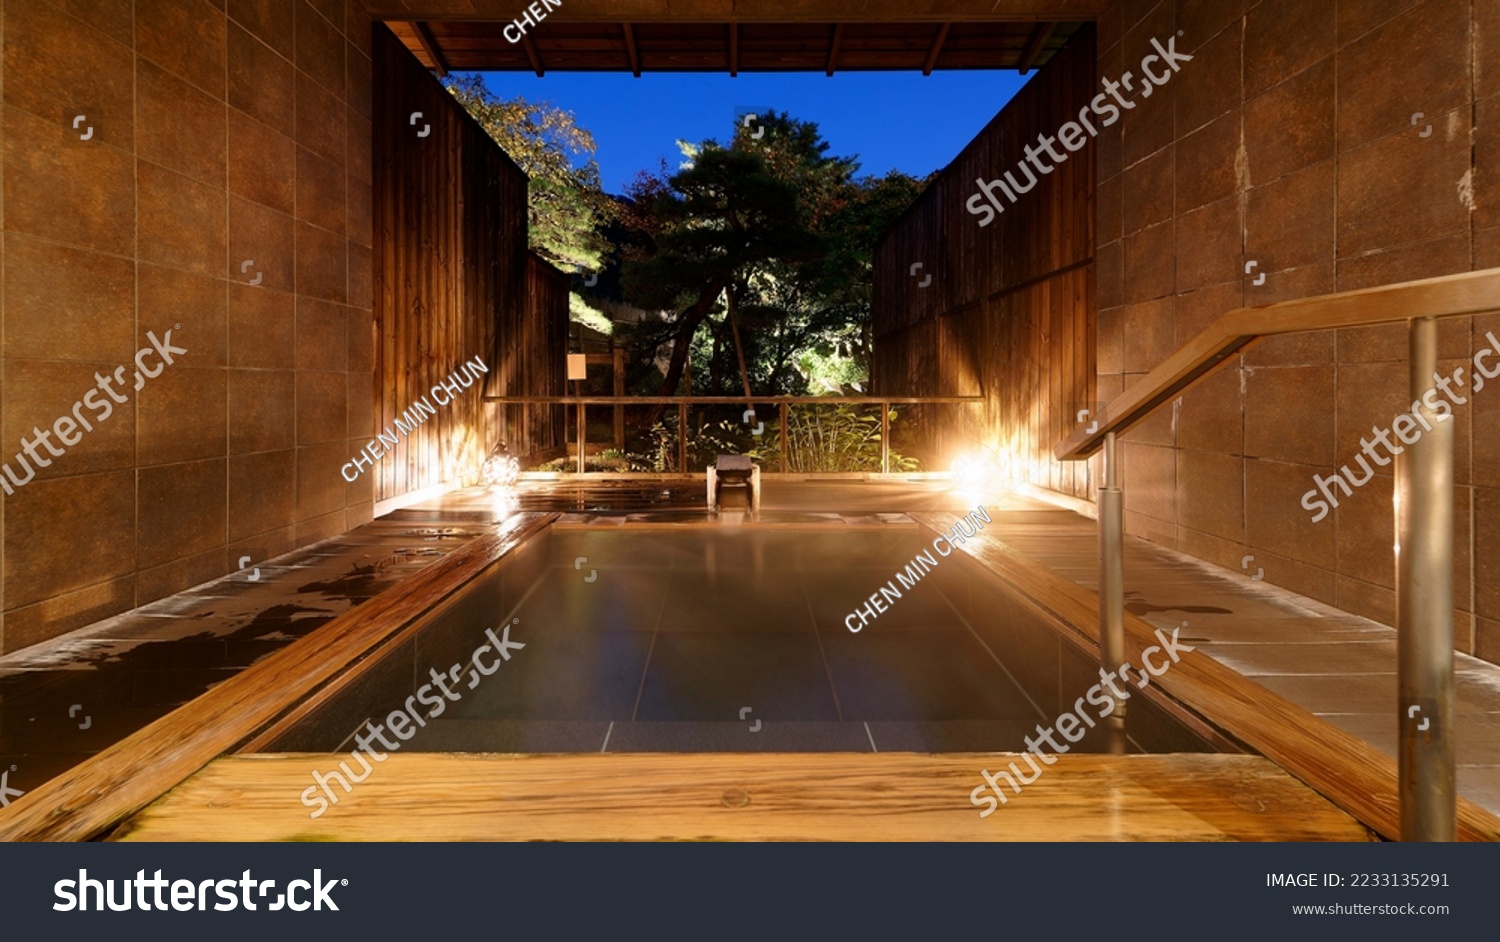 A Japanese-style open-air Kashikiri Buro (a charter hot-spring bath) in a Ryokan, with a wooden bathtub illuminated at blue dusk and a relaxing vibe in the natural setting of a green forest #2233135291